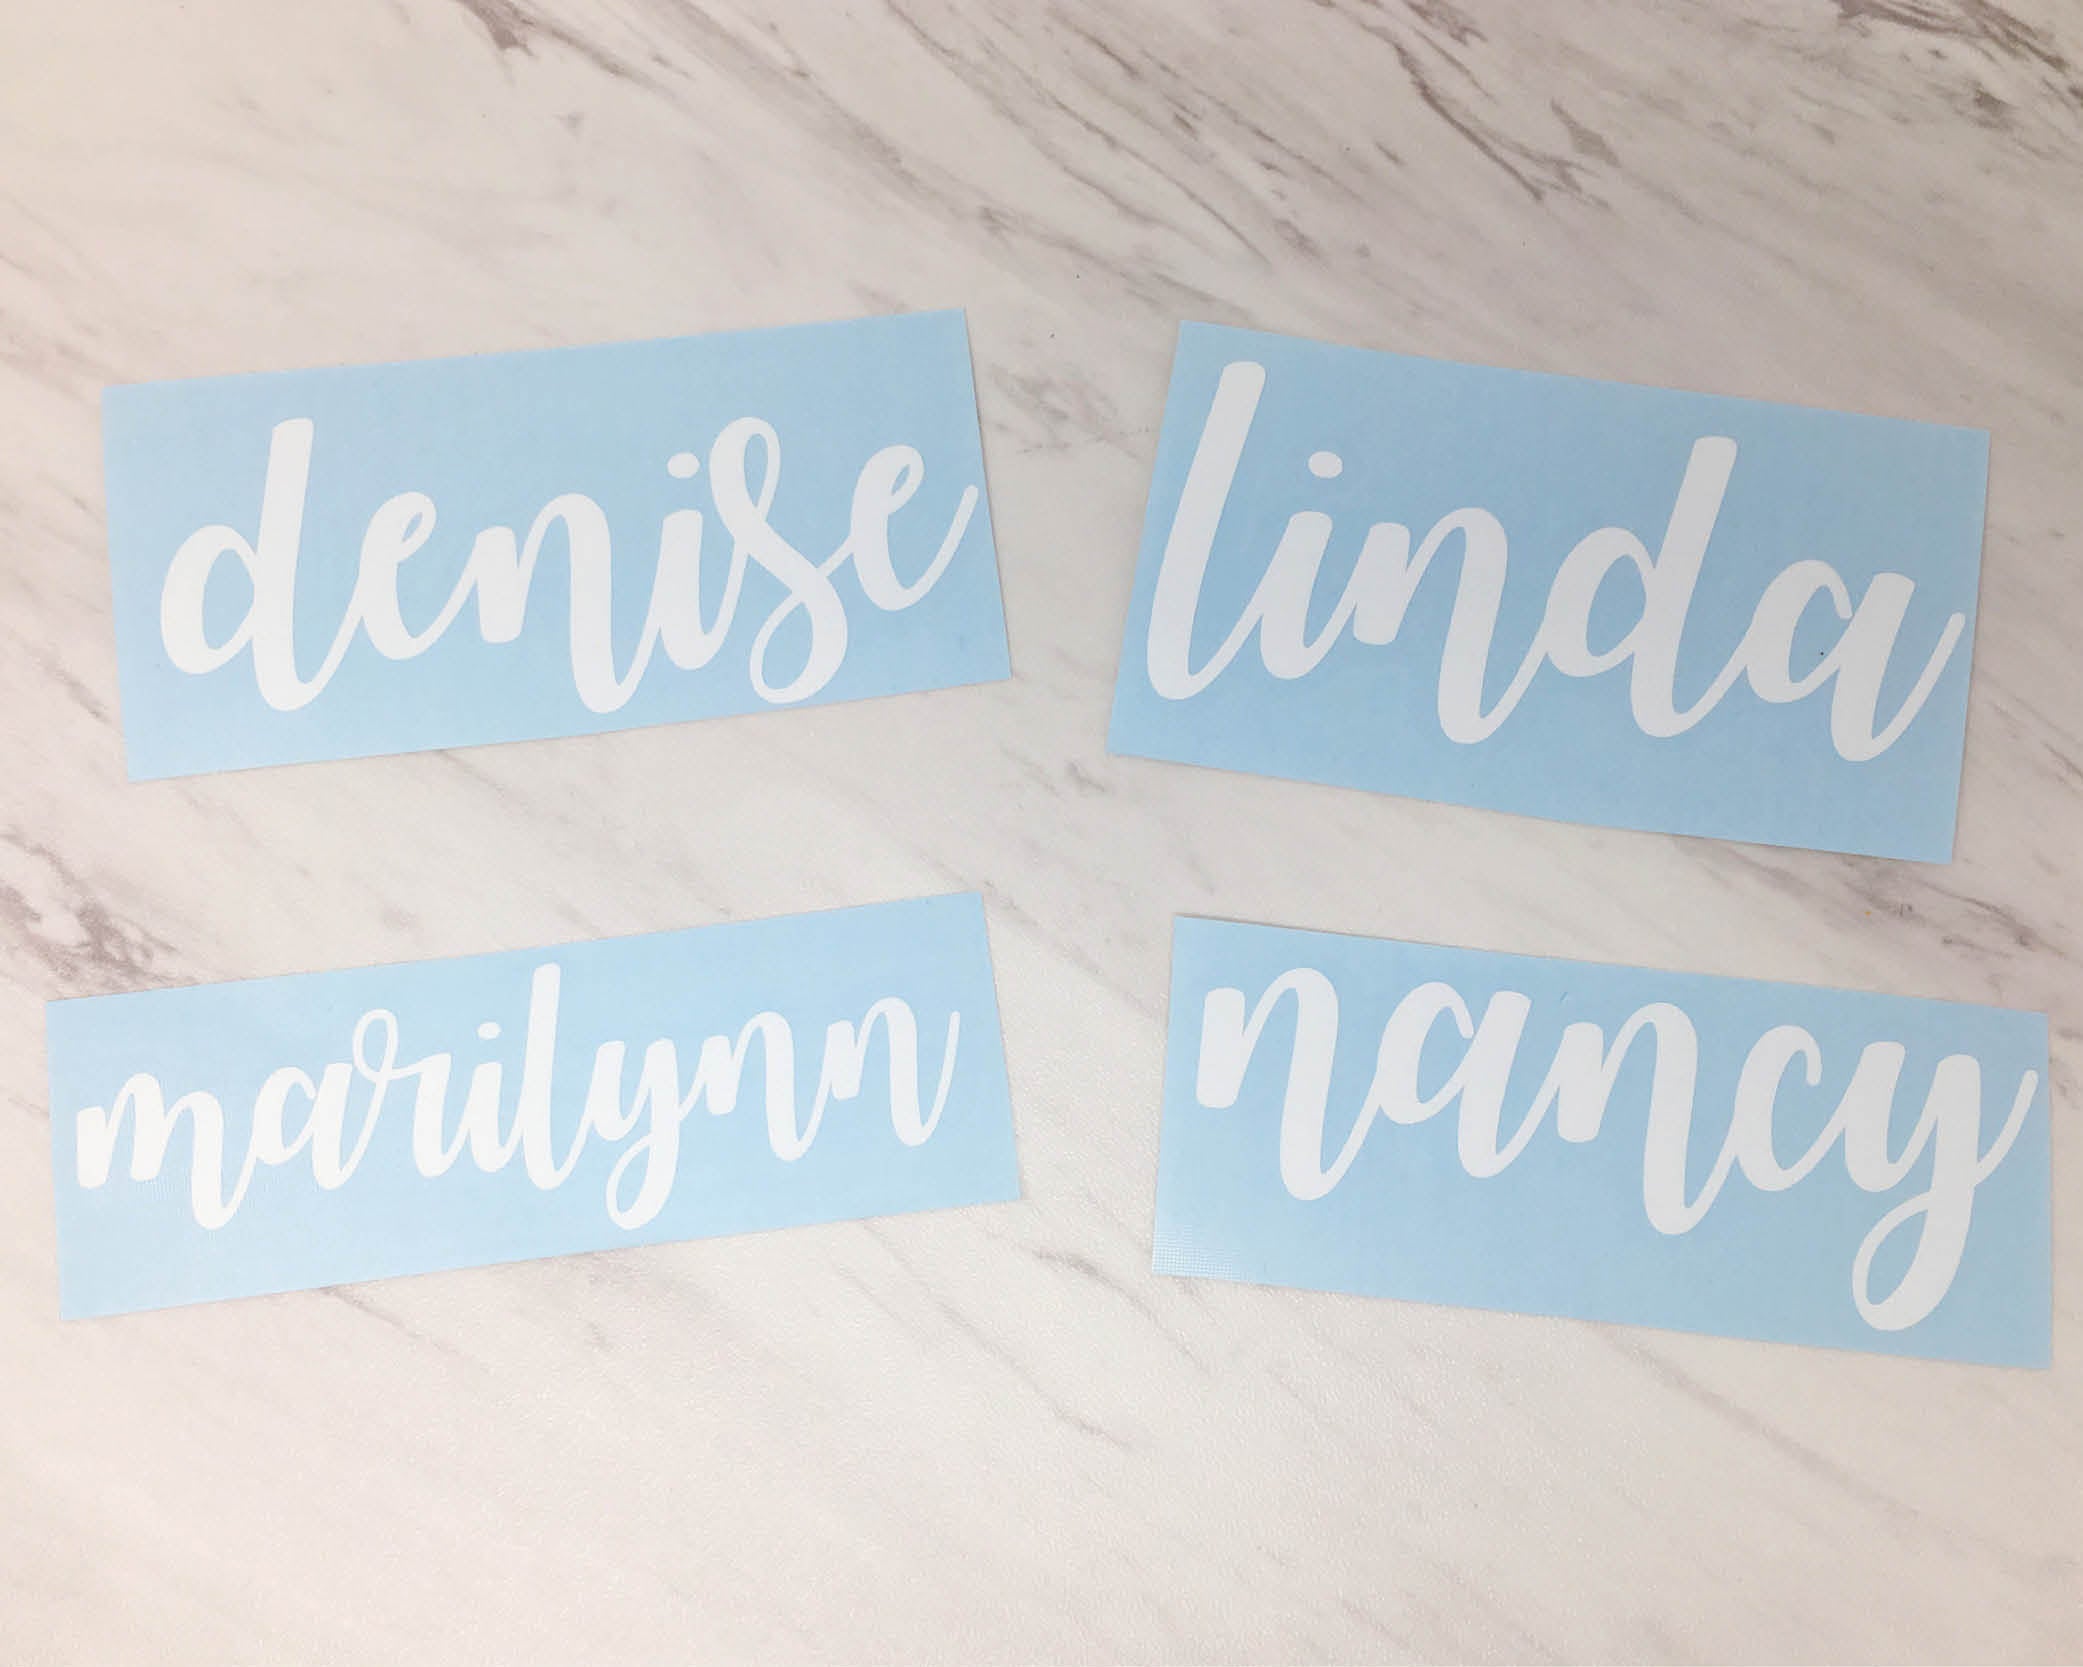 Personalized Name Vinyl Decal